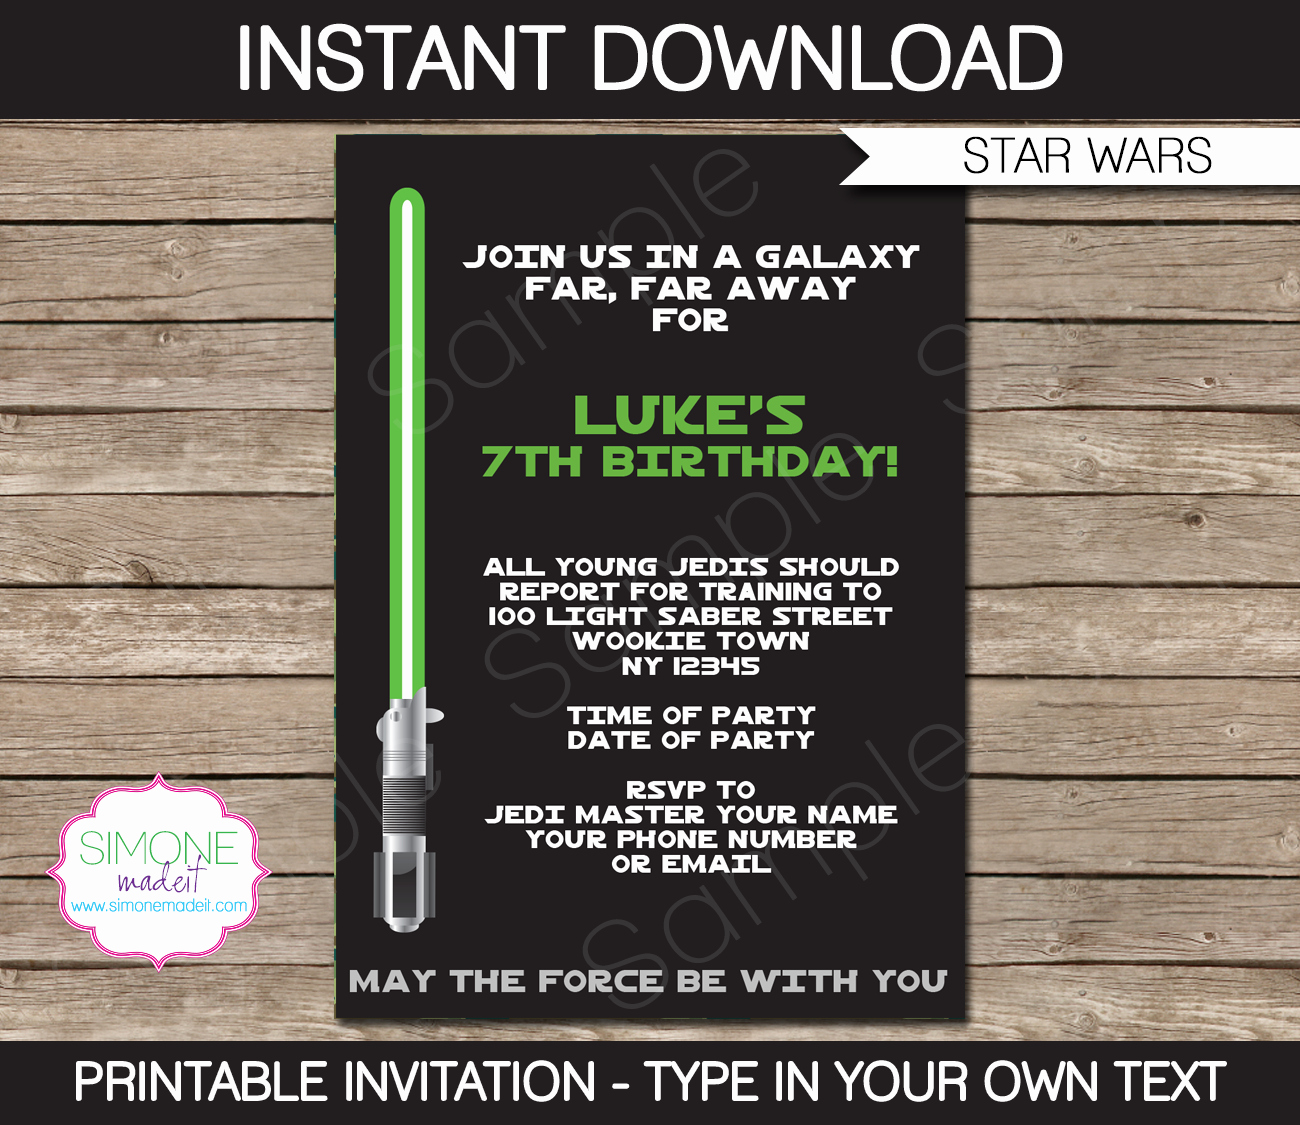 Star Wars Party Invitation Template Inspirational Star Wars Invites